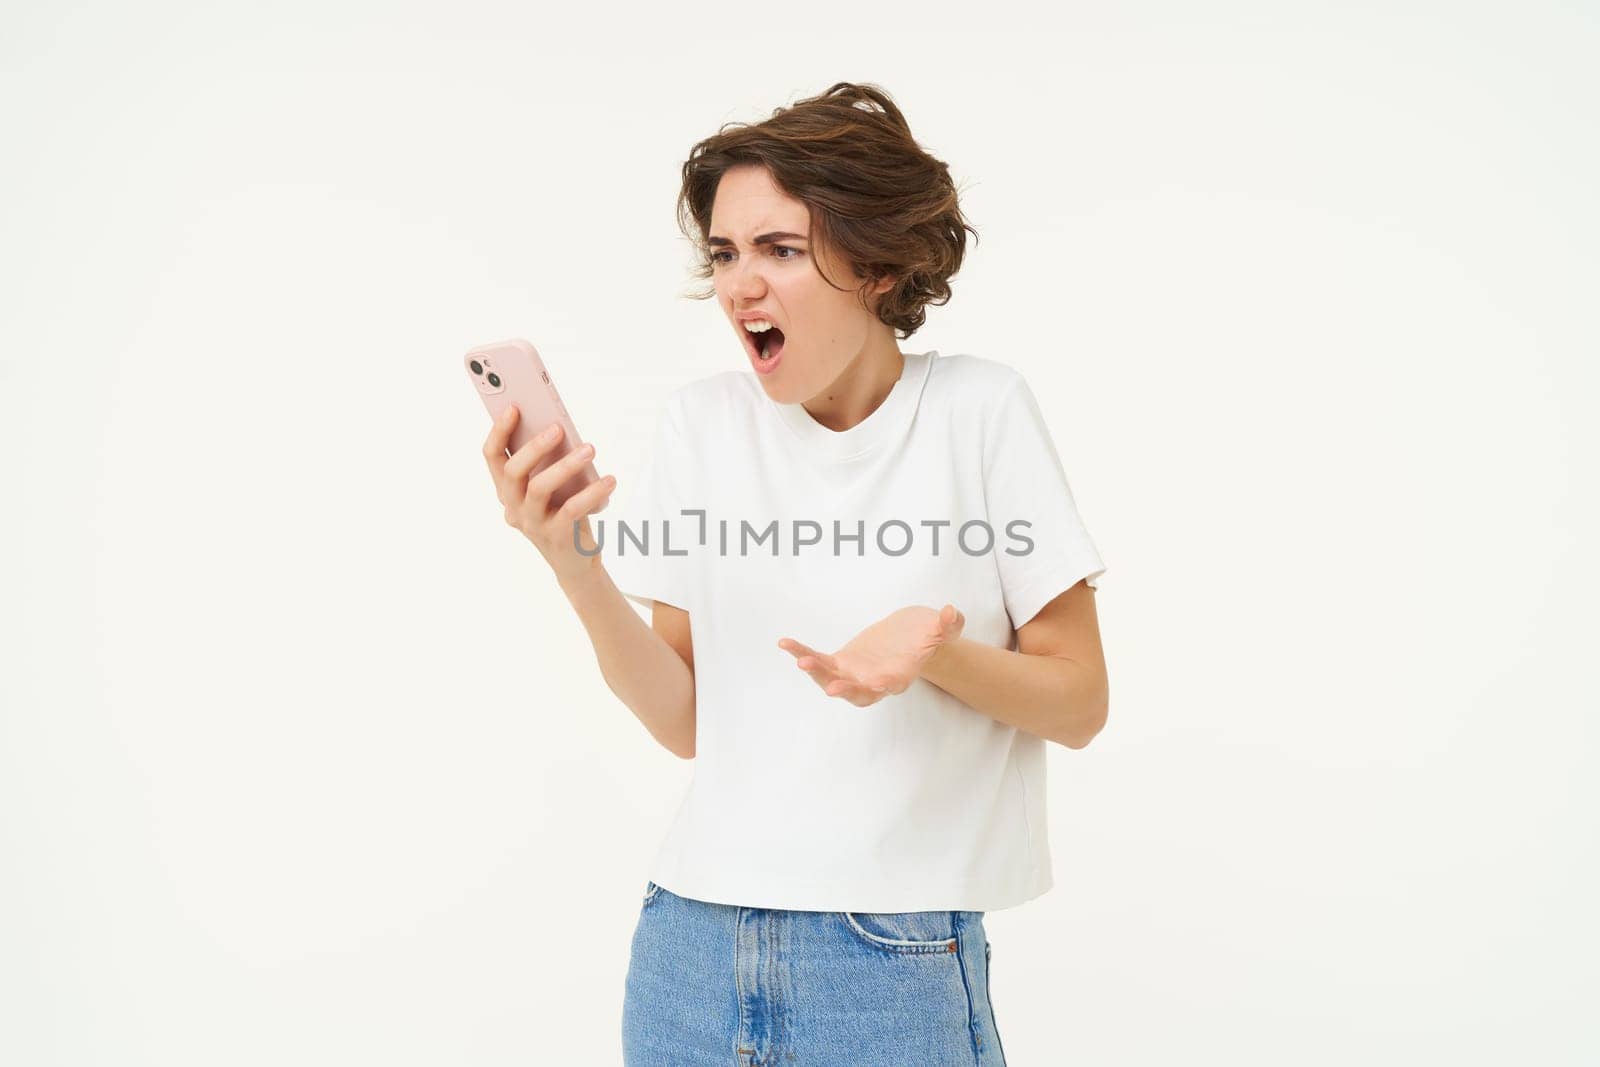 Portrait of confused and upset young woman, holding smartphone, shrugging shoulders and complaining at something online, standing over white background.